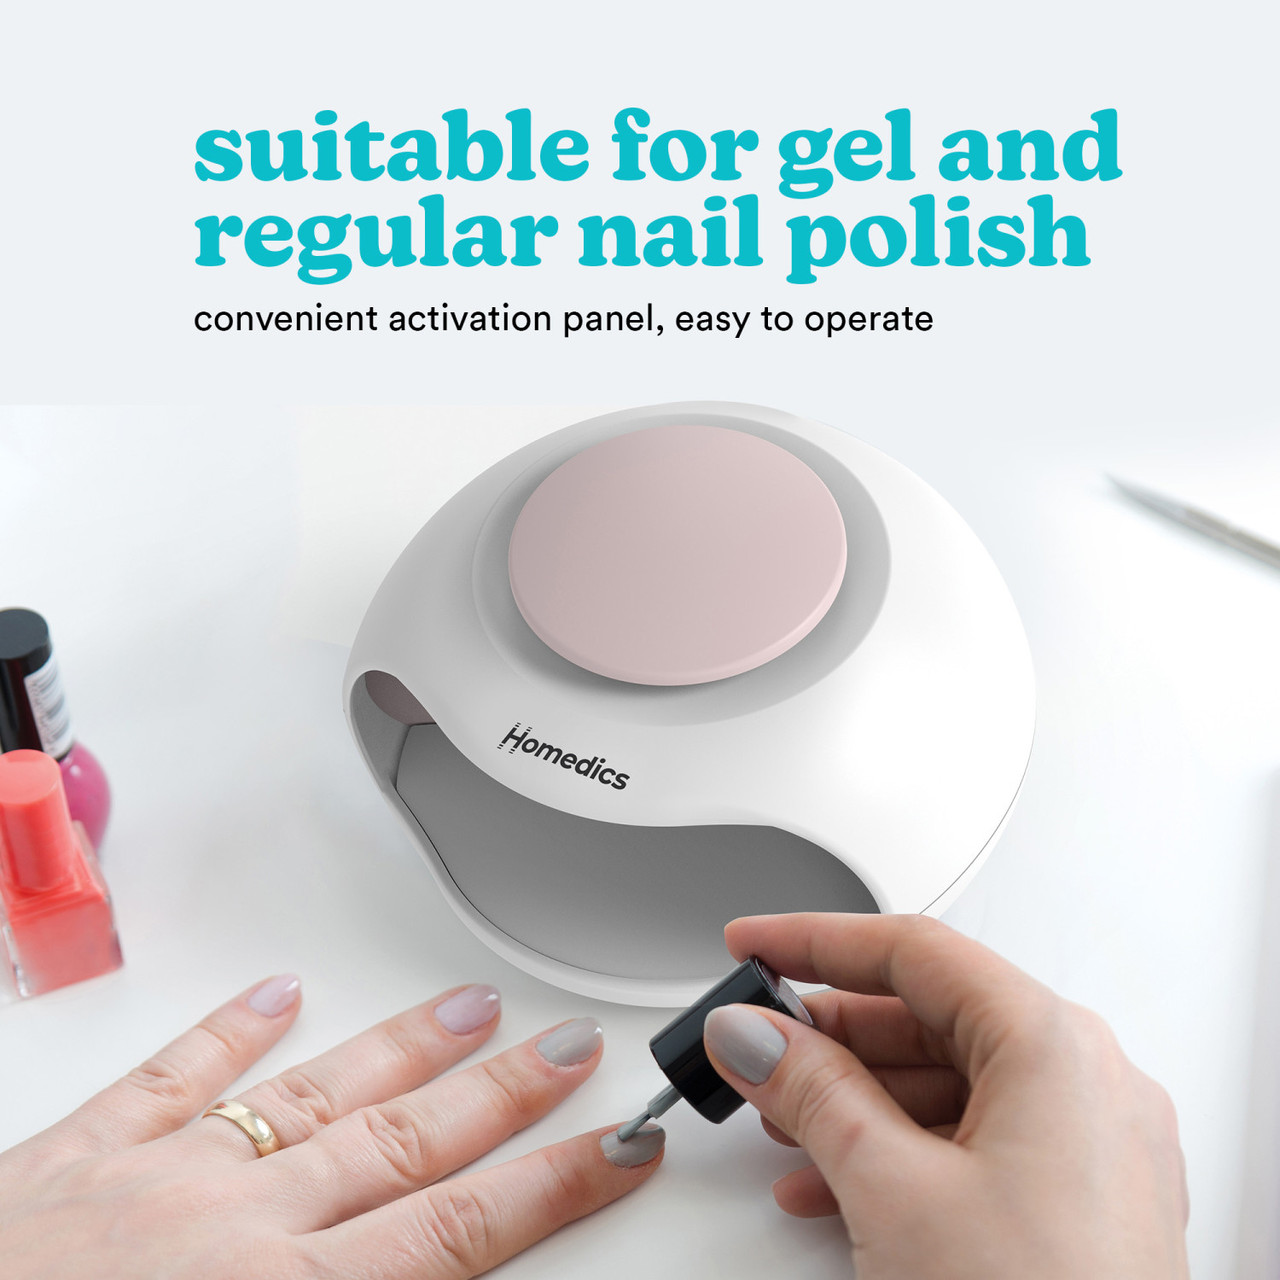 Cool Maker Go Glam Nail Stamper Review - MotherGeek